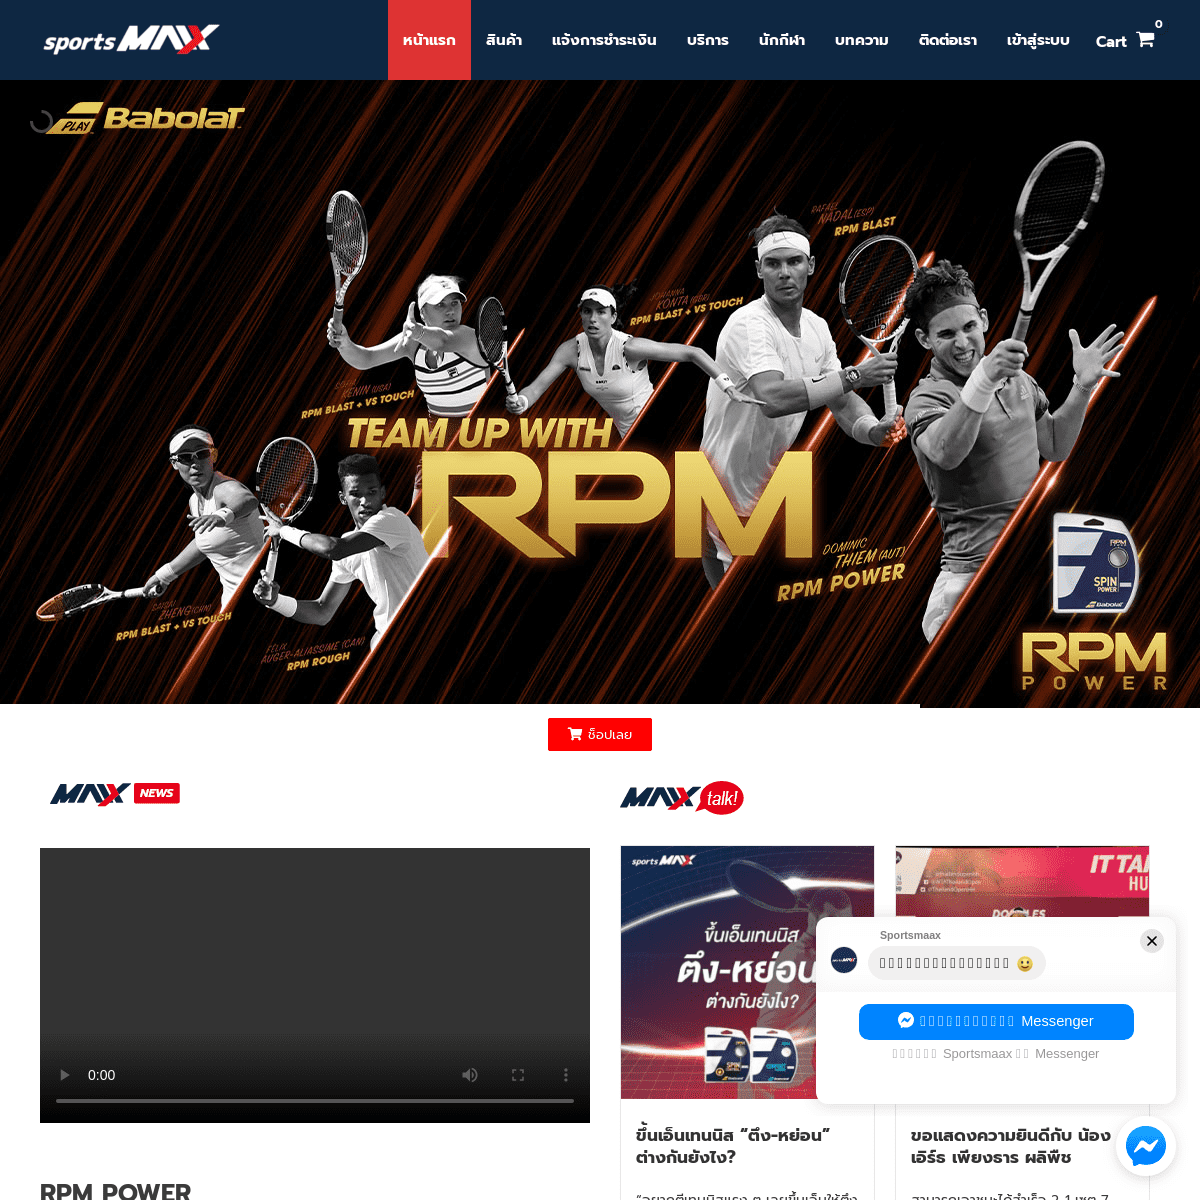 A complete backup of sportsmaax.com